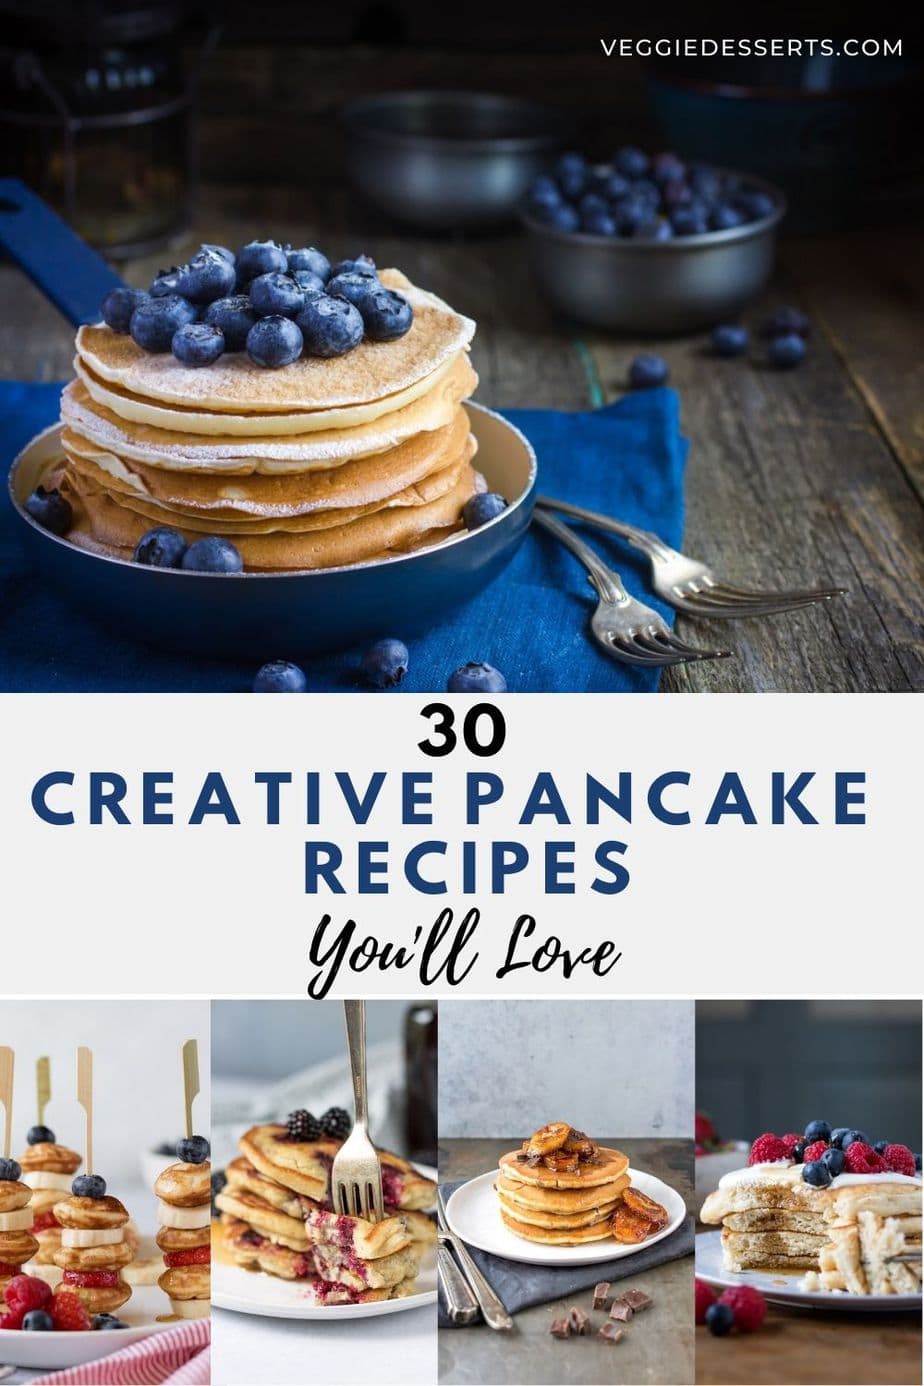 Collage of pancake images with text: 30 Creative Pancake Recipes You'll Love.